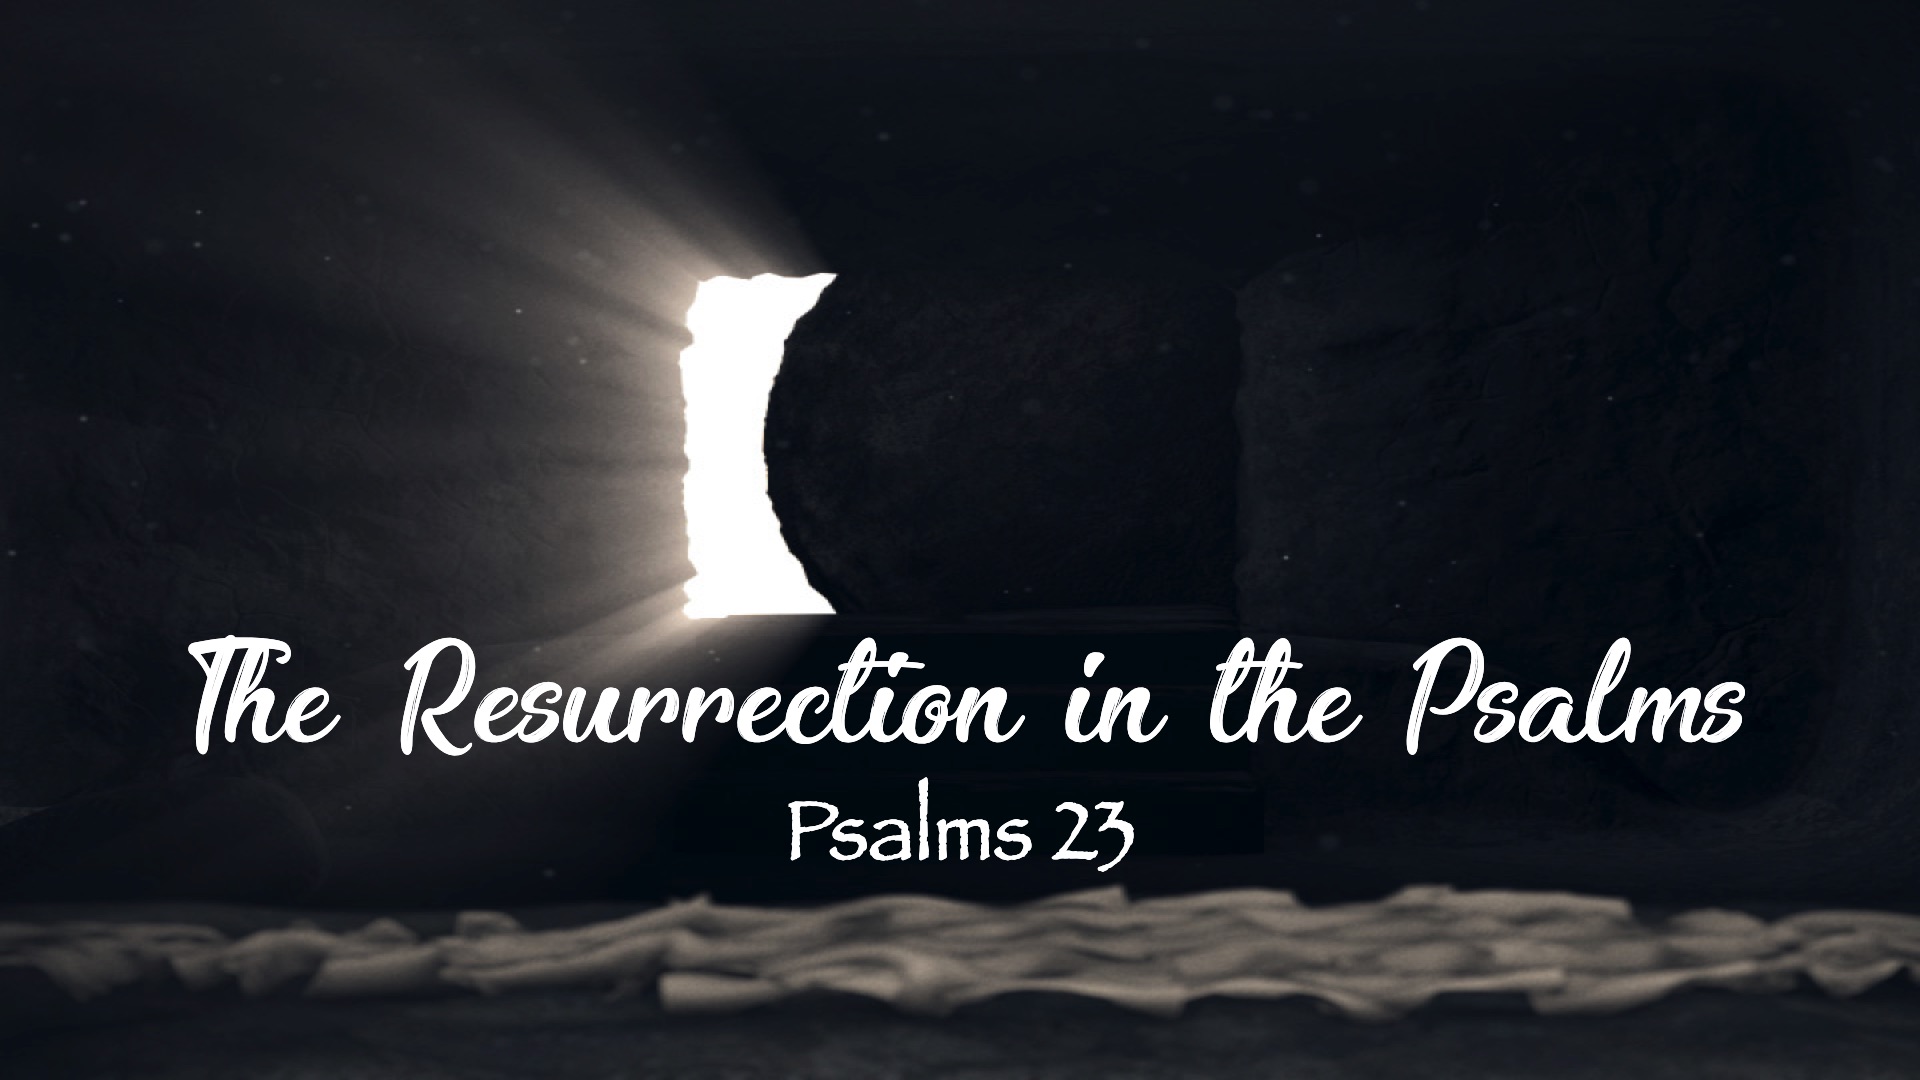 “The Resurrection in the Psalms”